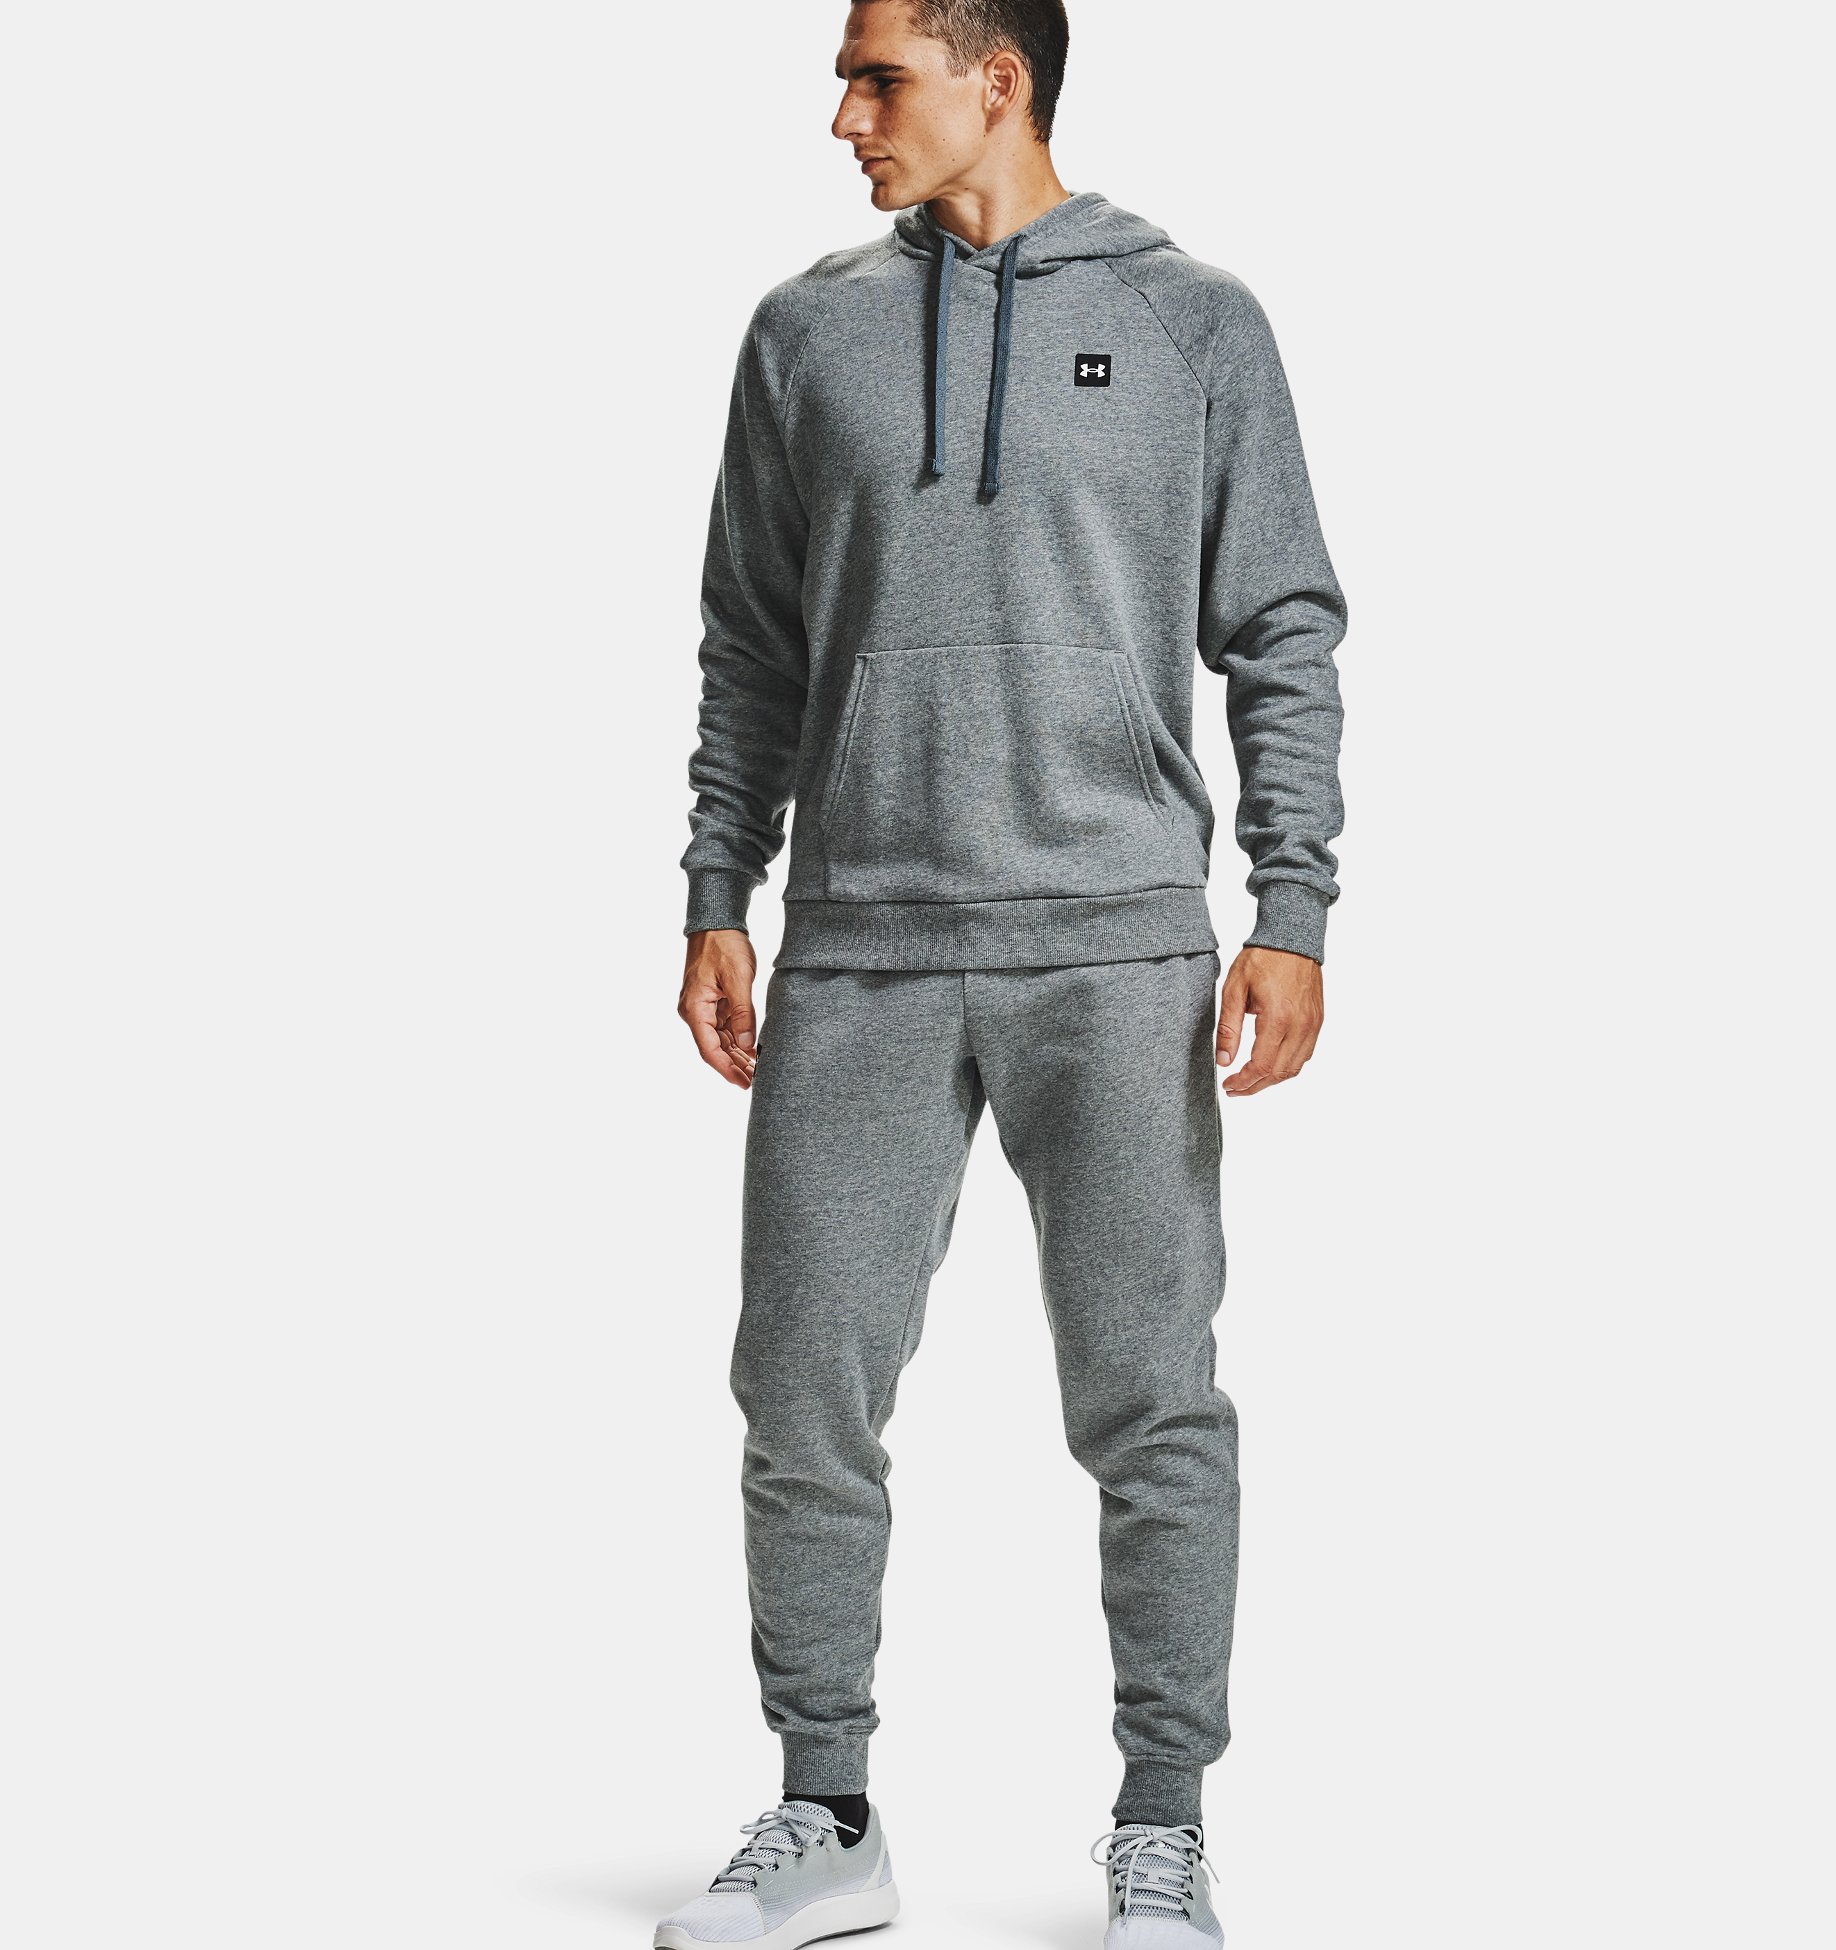 Comfortable and Warm Hooded Jumper for Men Under Armour Mens Rival Fleece Fz Hoodie Men’s Running Hoodie With Loose Fit 